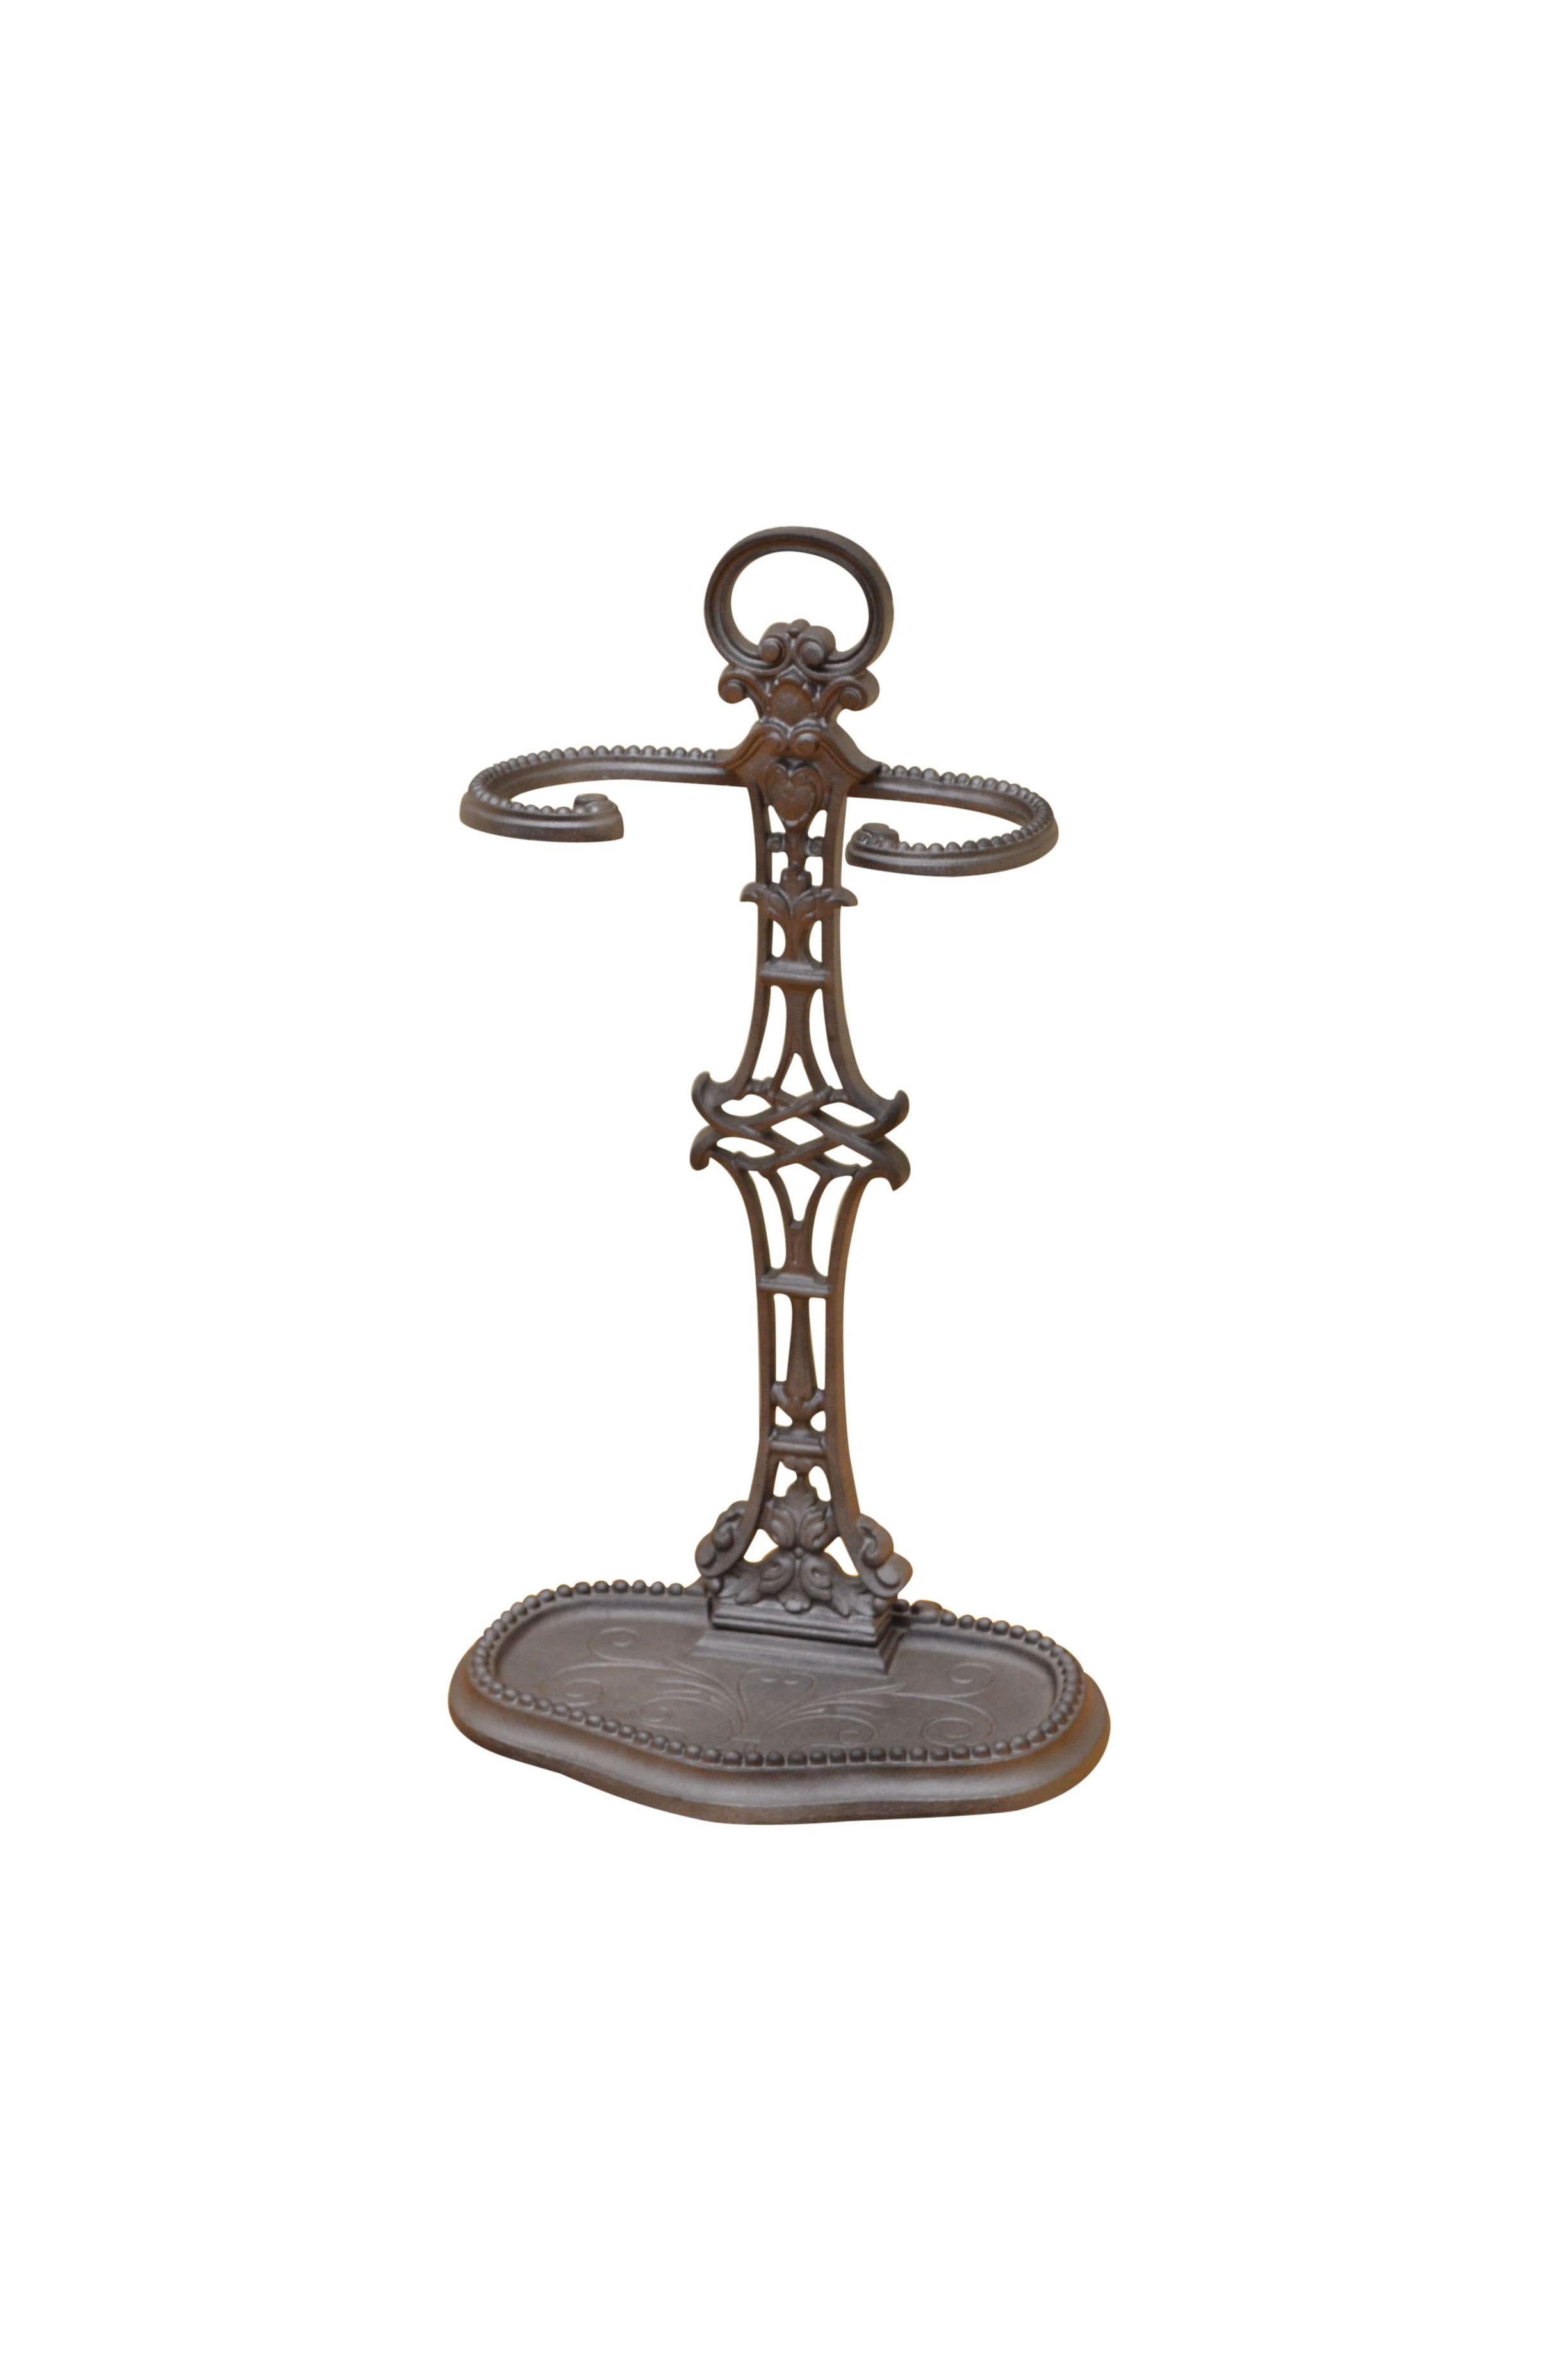 19th Century French Umbrella Stand or Fire Companion Stand For Sale 2